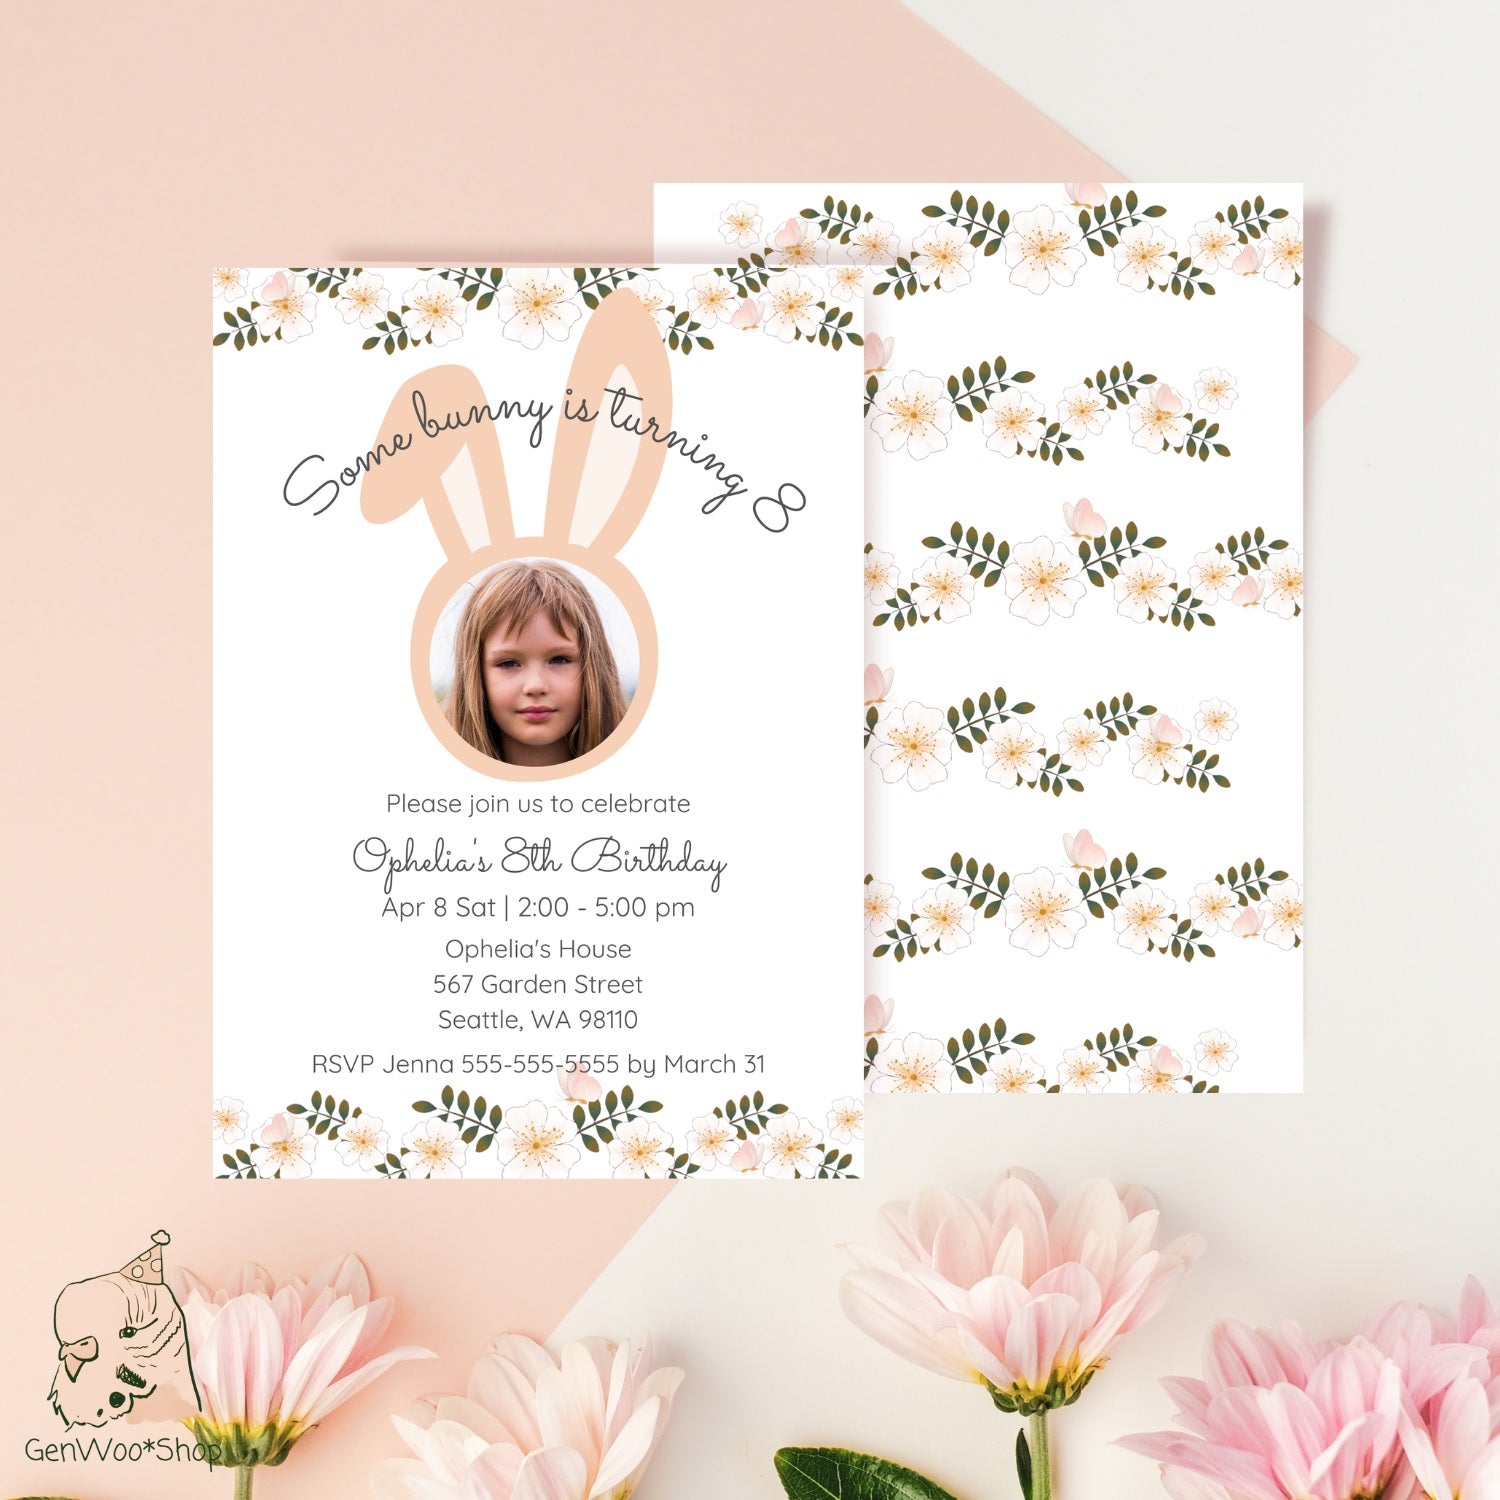 Editable Digital Easter Bunny Photo Birthday Invitation With Flowers - Spring Easter Themed Birthday Party Invitation Canva Template